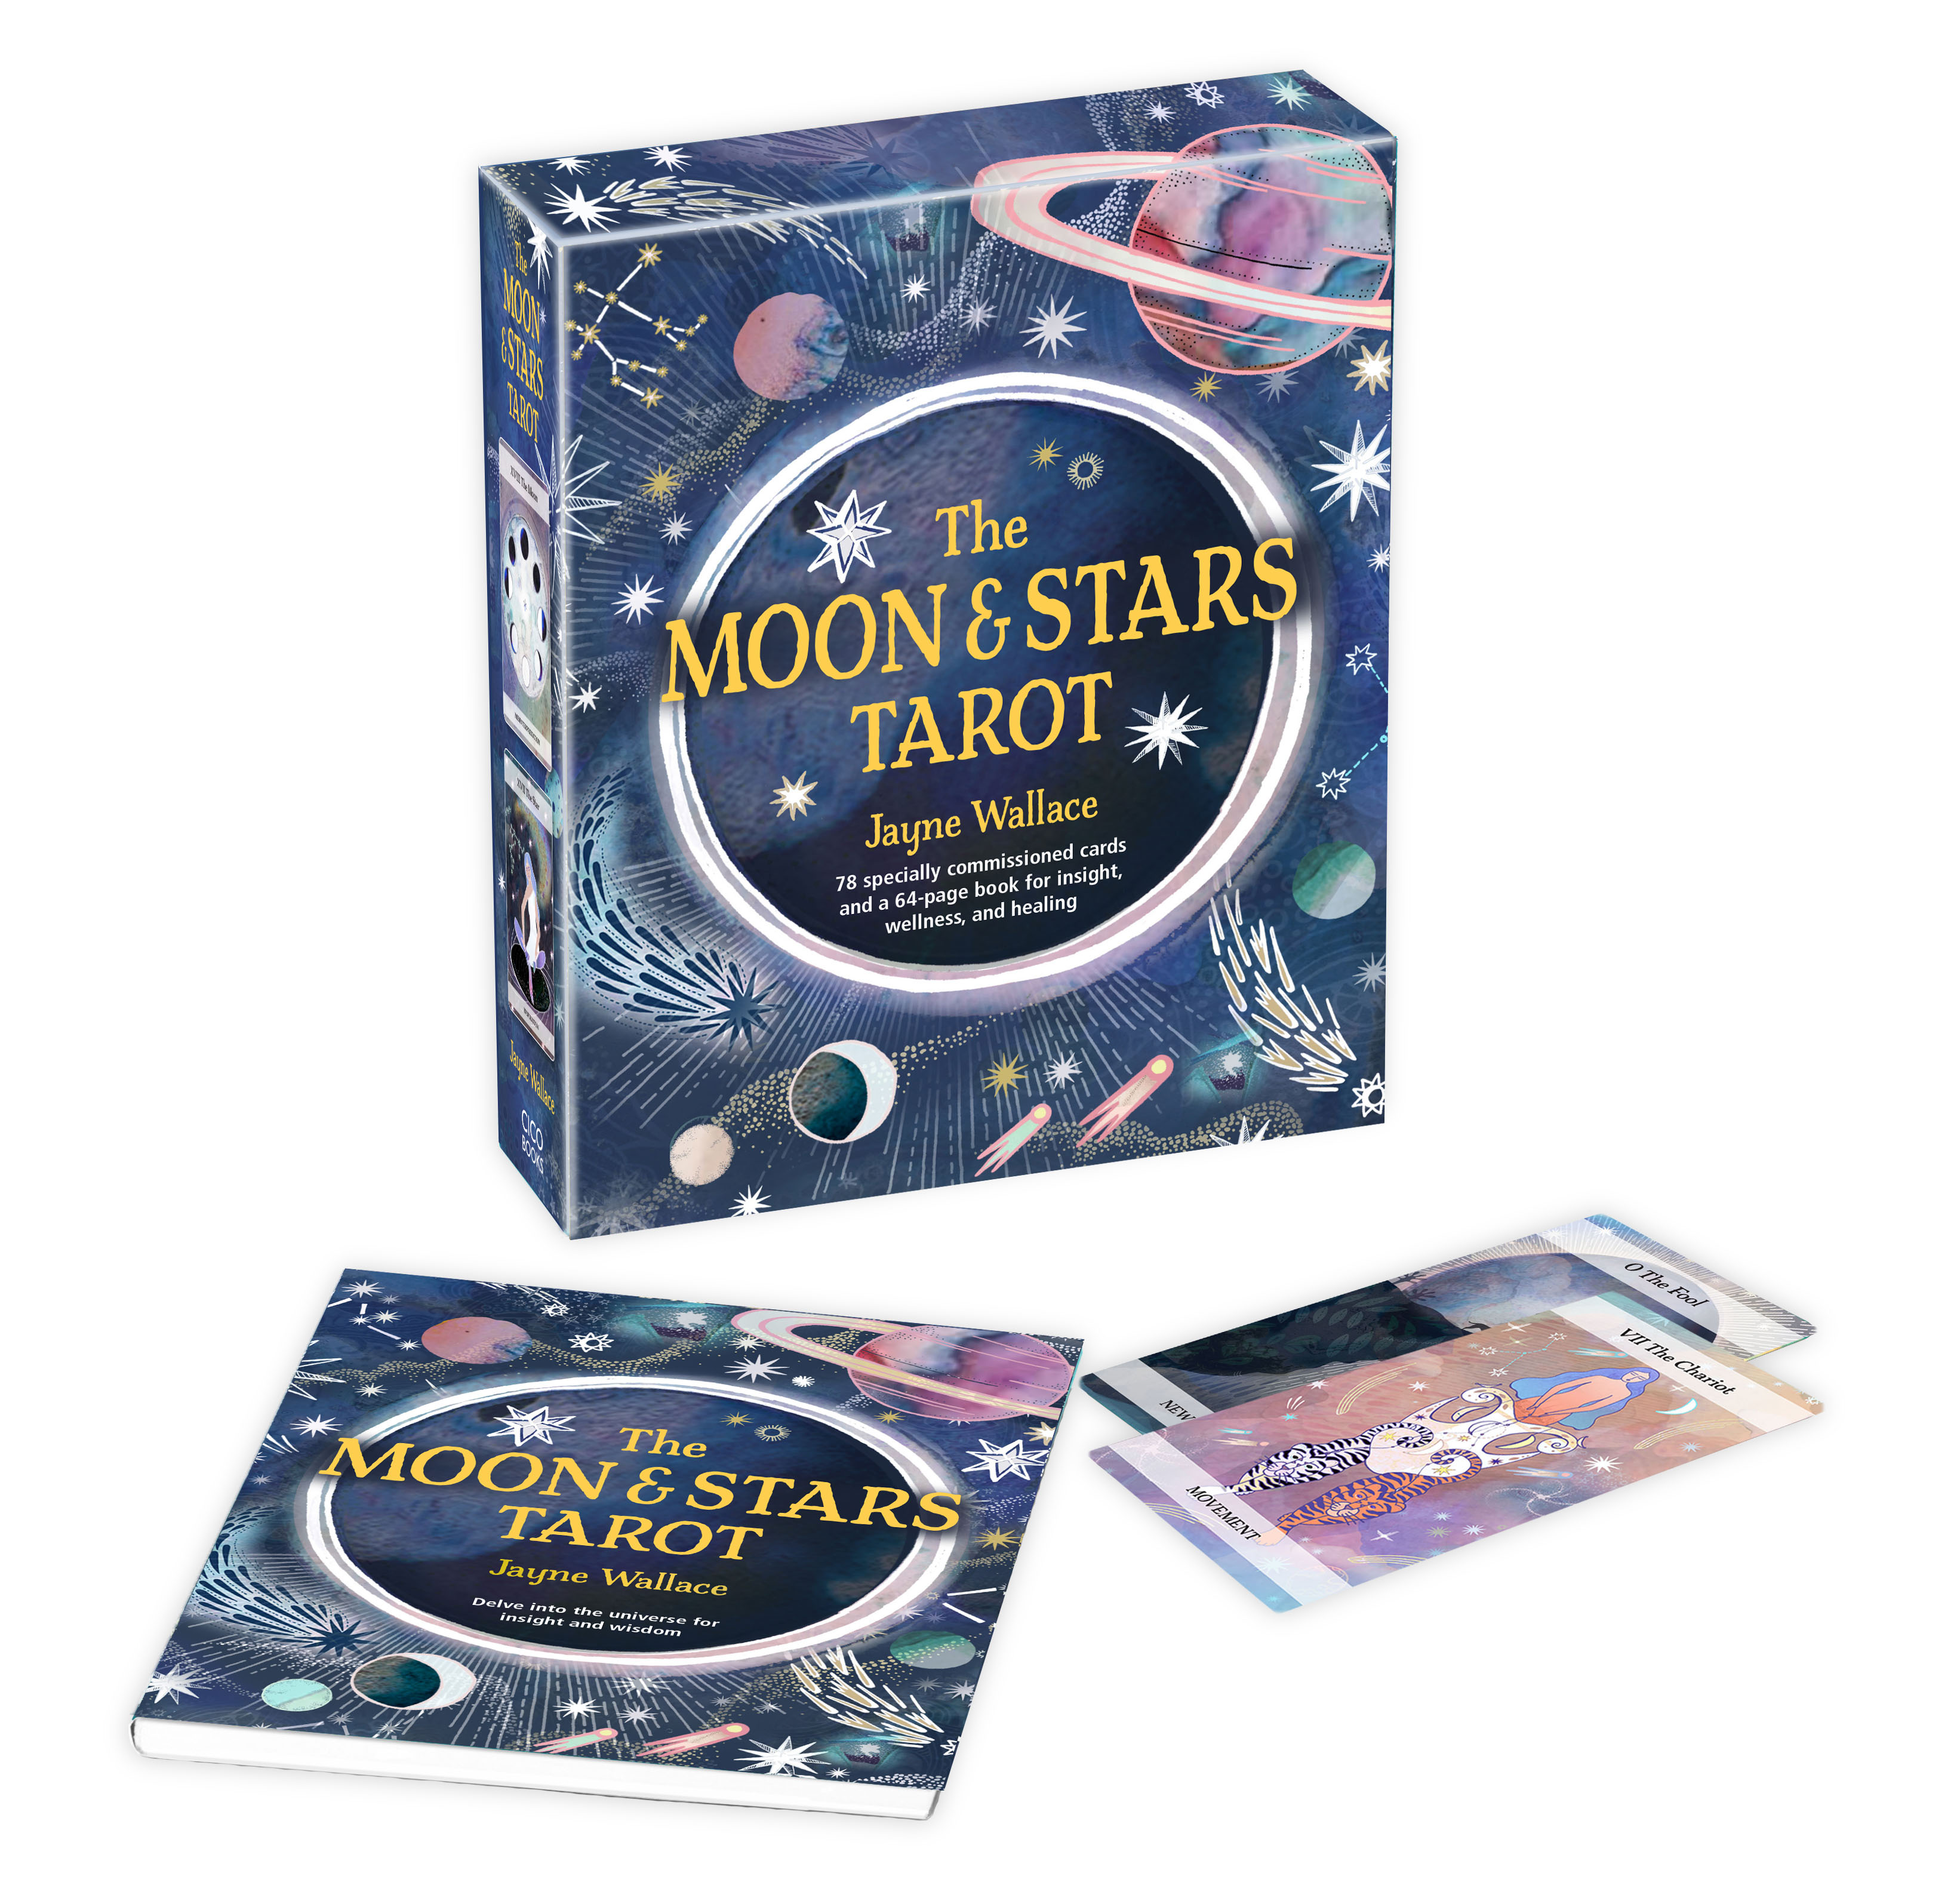 The Moon &amp; Stars Tarot : Includes a full deck of 78 specially commissioned tarot cards and a 64-page illustrated book | 